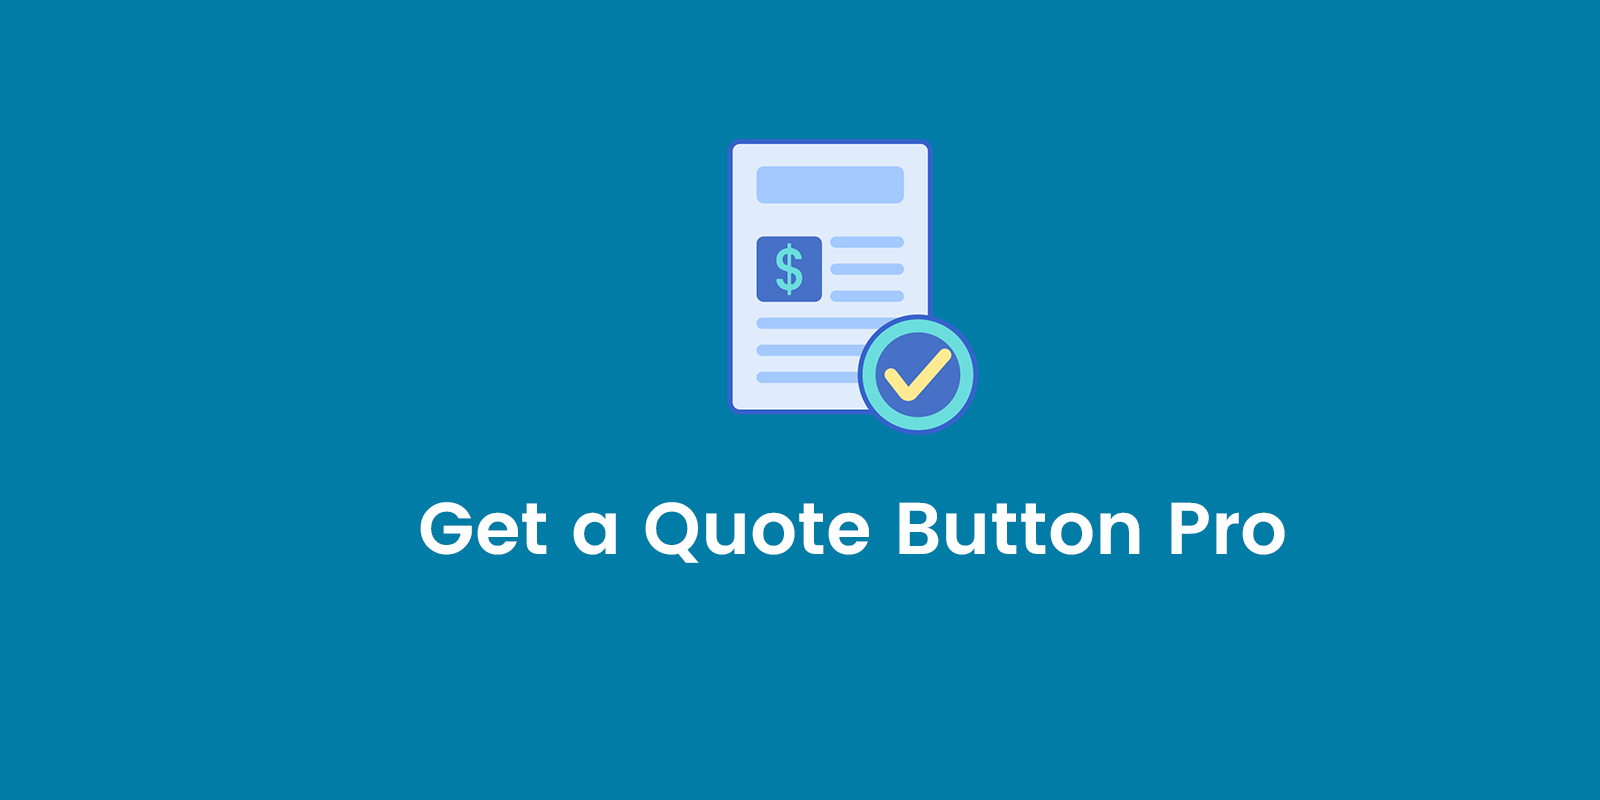 Get a Quote Button for WooCommerce